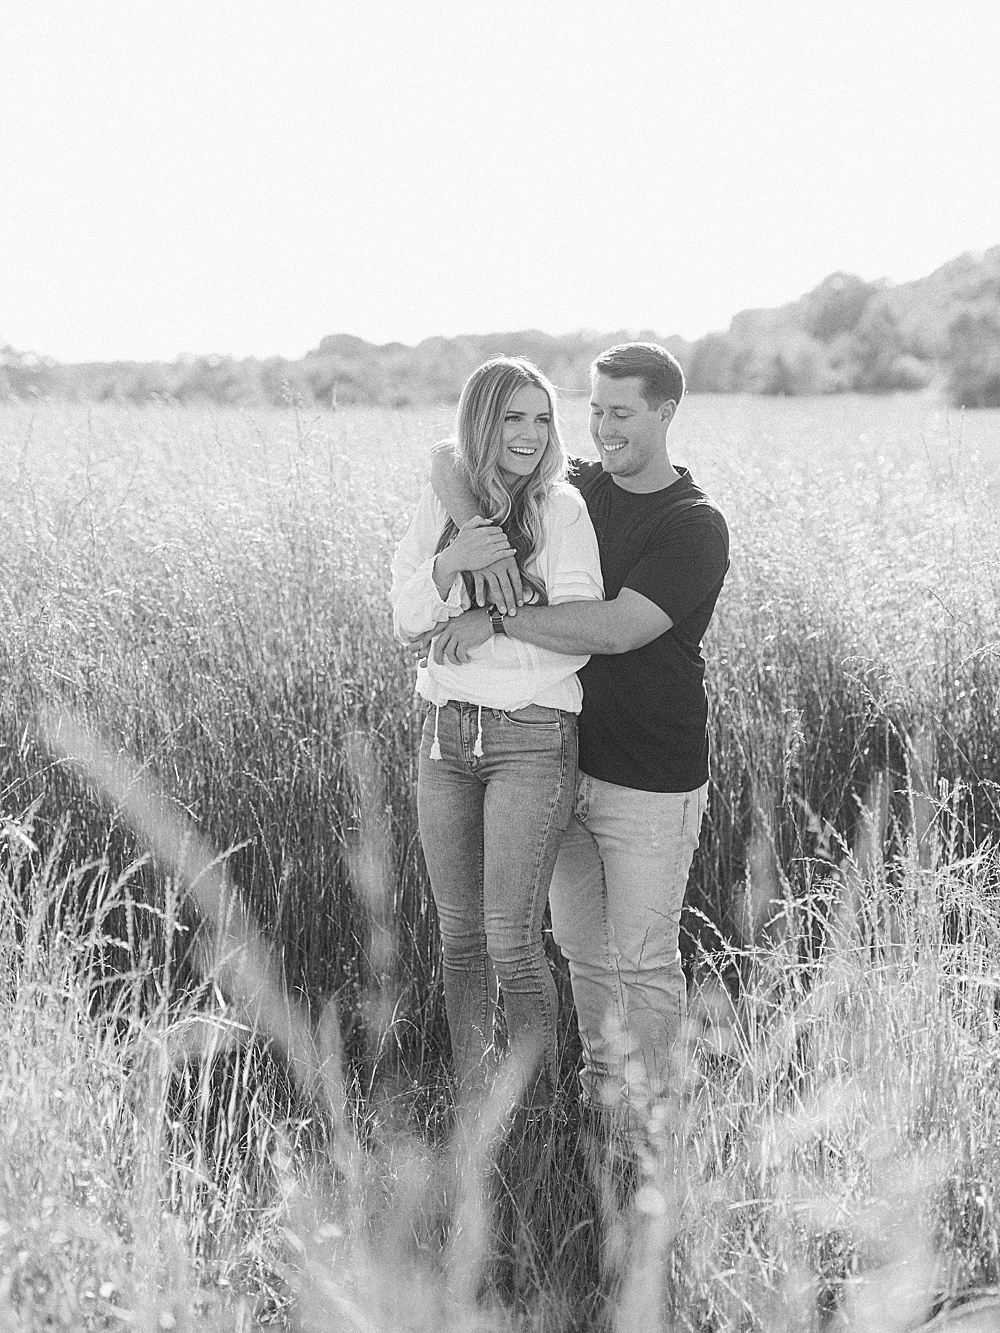 Atlanta engagement photos in a field